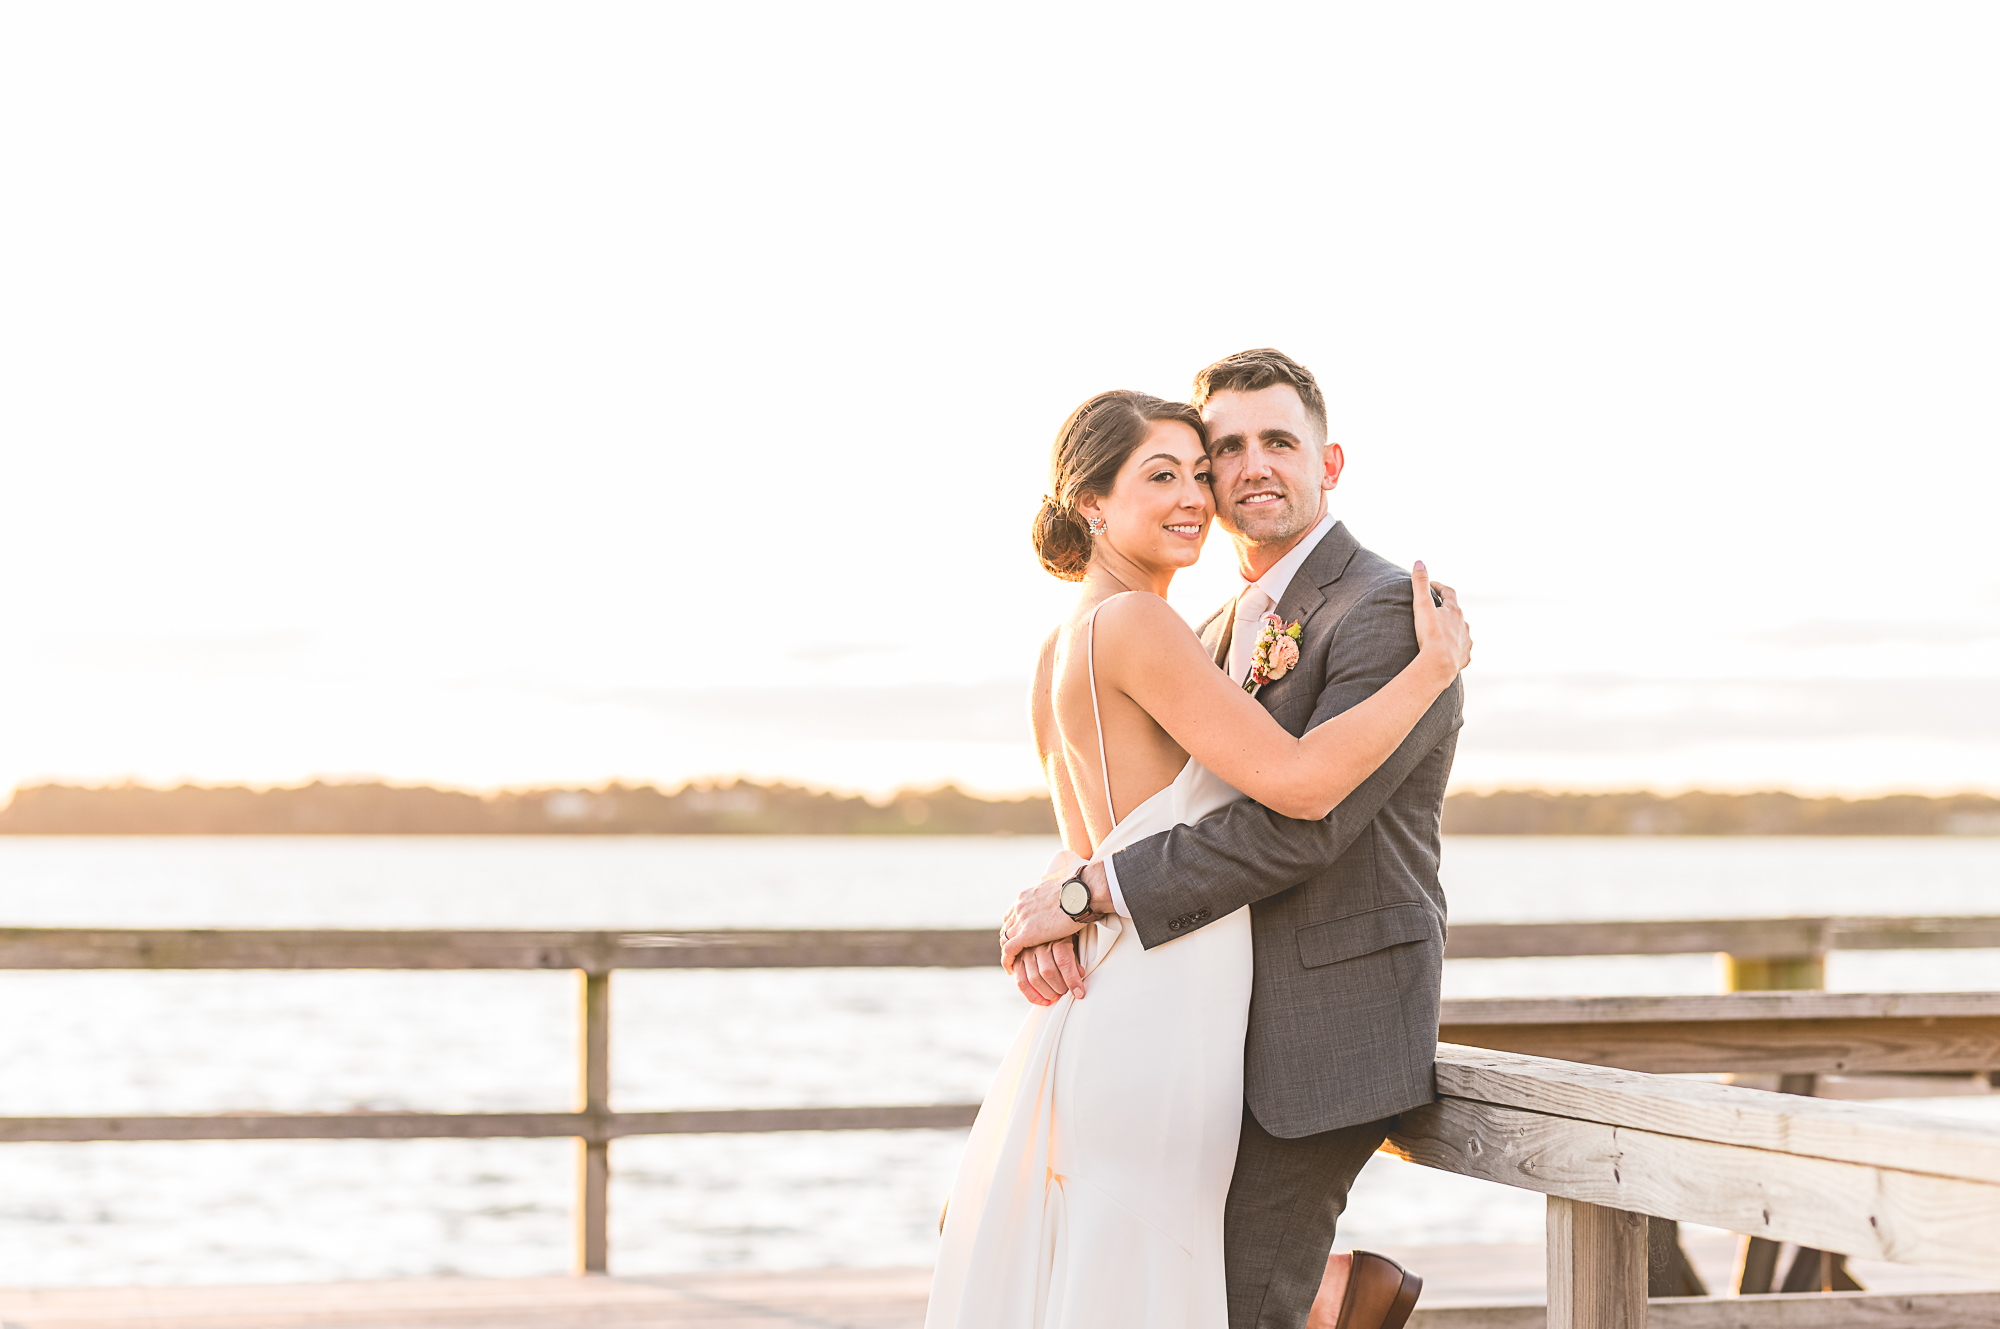 Wedding at Blithewold Mansion, Gardens & Arboretum in Bristol RI. Bride and groom embracing on a dock by the water at sunset.